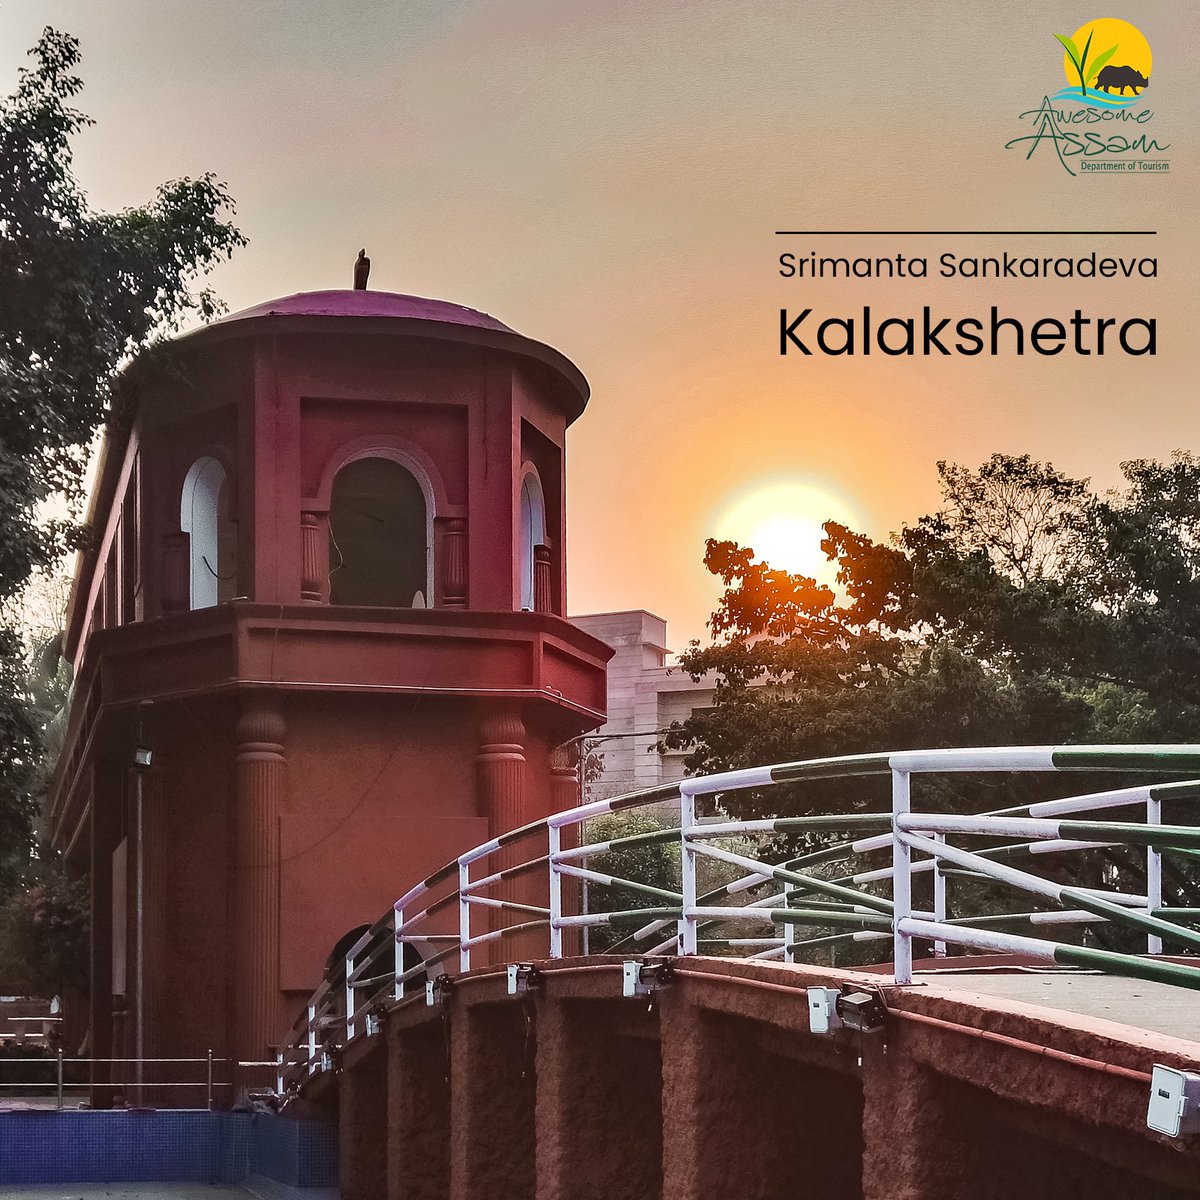 Srimanta Sankardev Kalakshetrais a cultural centre which consists of convention centres, museums, amphitheatre and culture centres where one can experience various aspects of Assamese culture and history. #AwesomeAssam #SankardevKalakshetra #Art #Guwahati #AssamTourism #History…